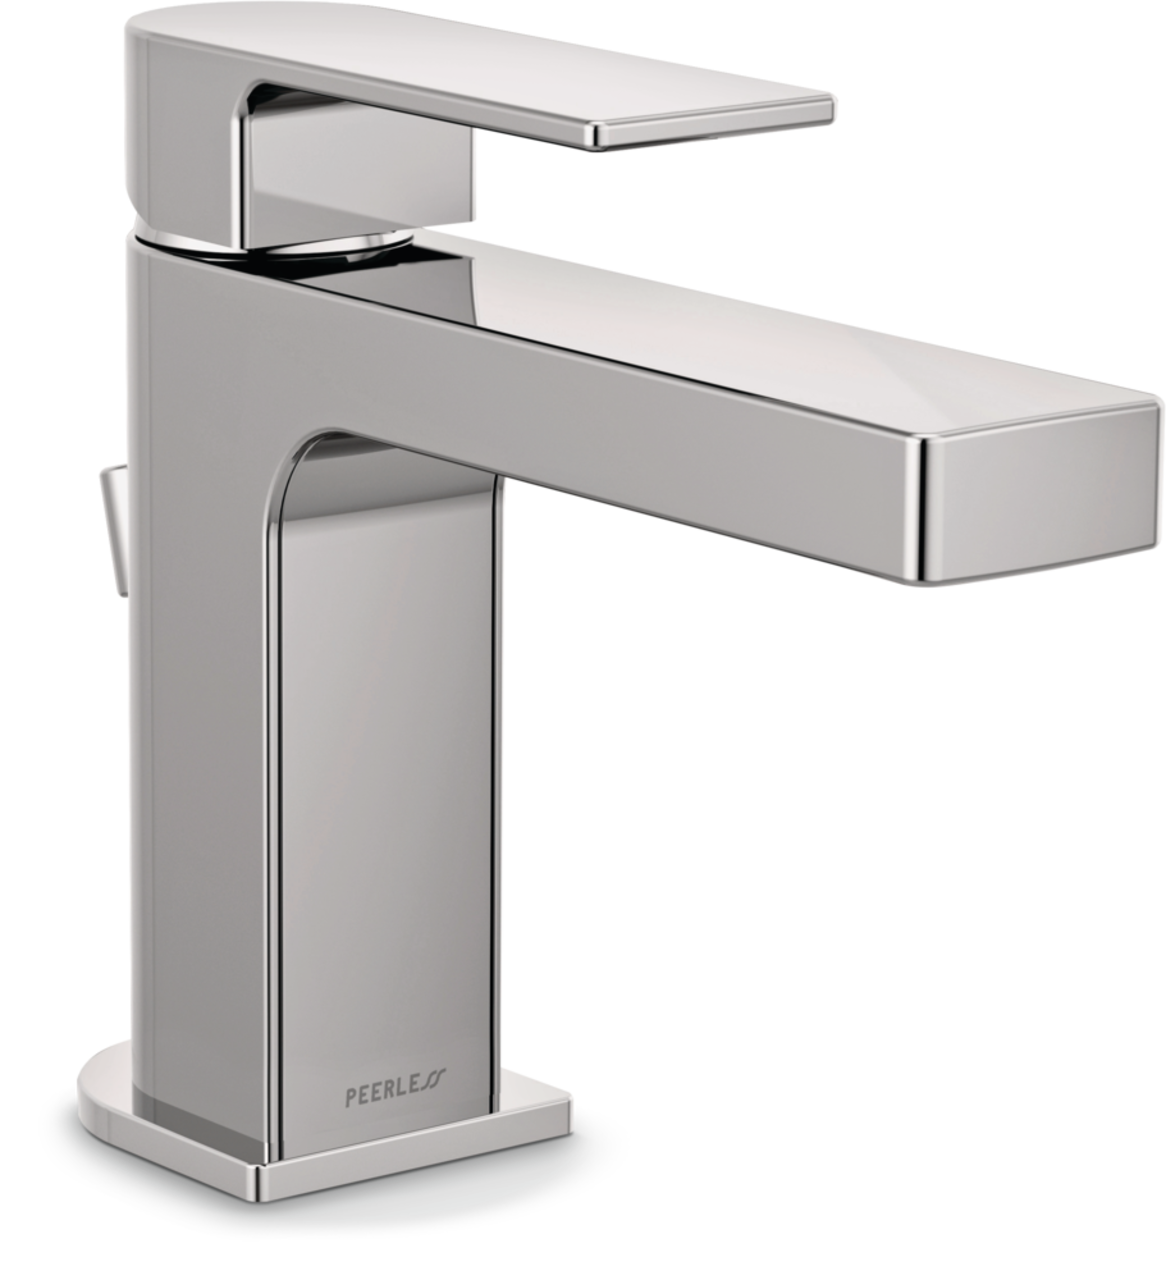 https://media-www.canadiantire.ca/product/fixing/plumbing/faucets-fixtures/0639991/peerless-xander-1-handle-lavatory-faucet-chrome-c0bb3942-109d-47ff-934c-13ea655a39a5.png?imdensity=1&imwidth=640&impolicy=mZoom